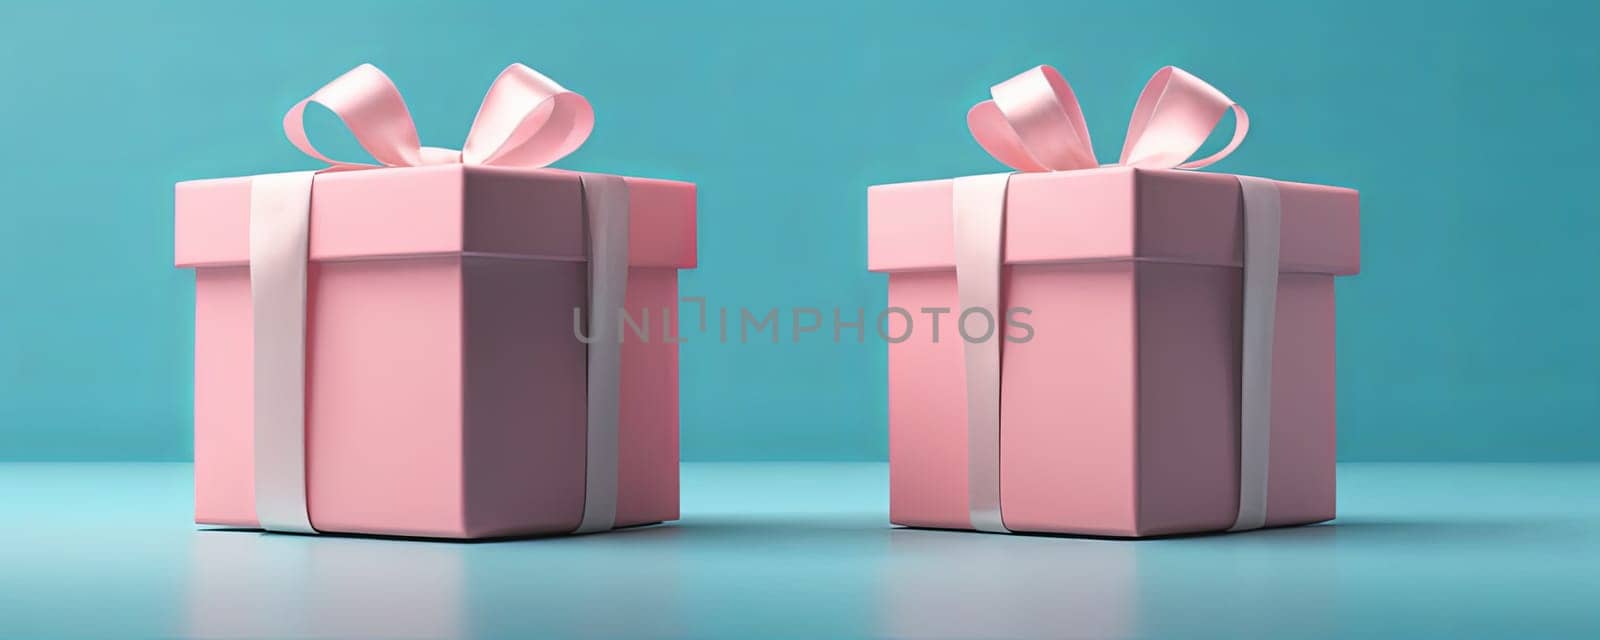 Gift boxes with red ribbons, white surface, teal background, celebration, gifting opportunity.